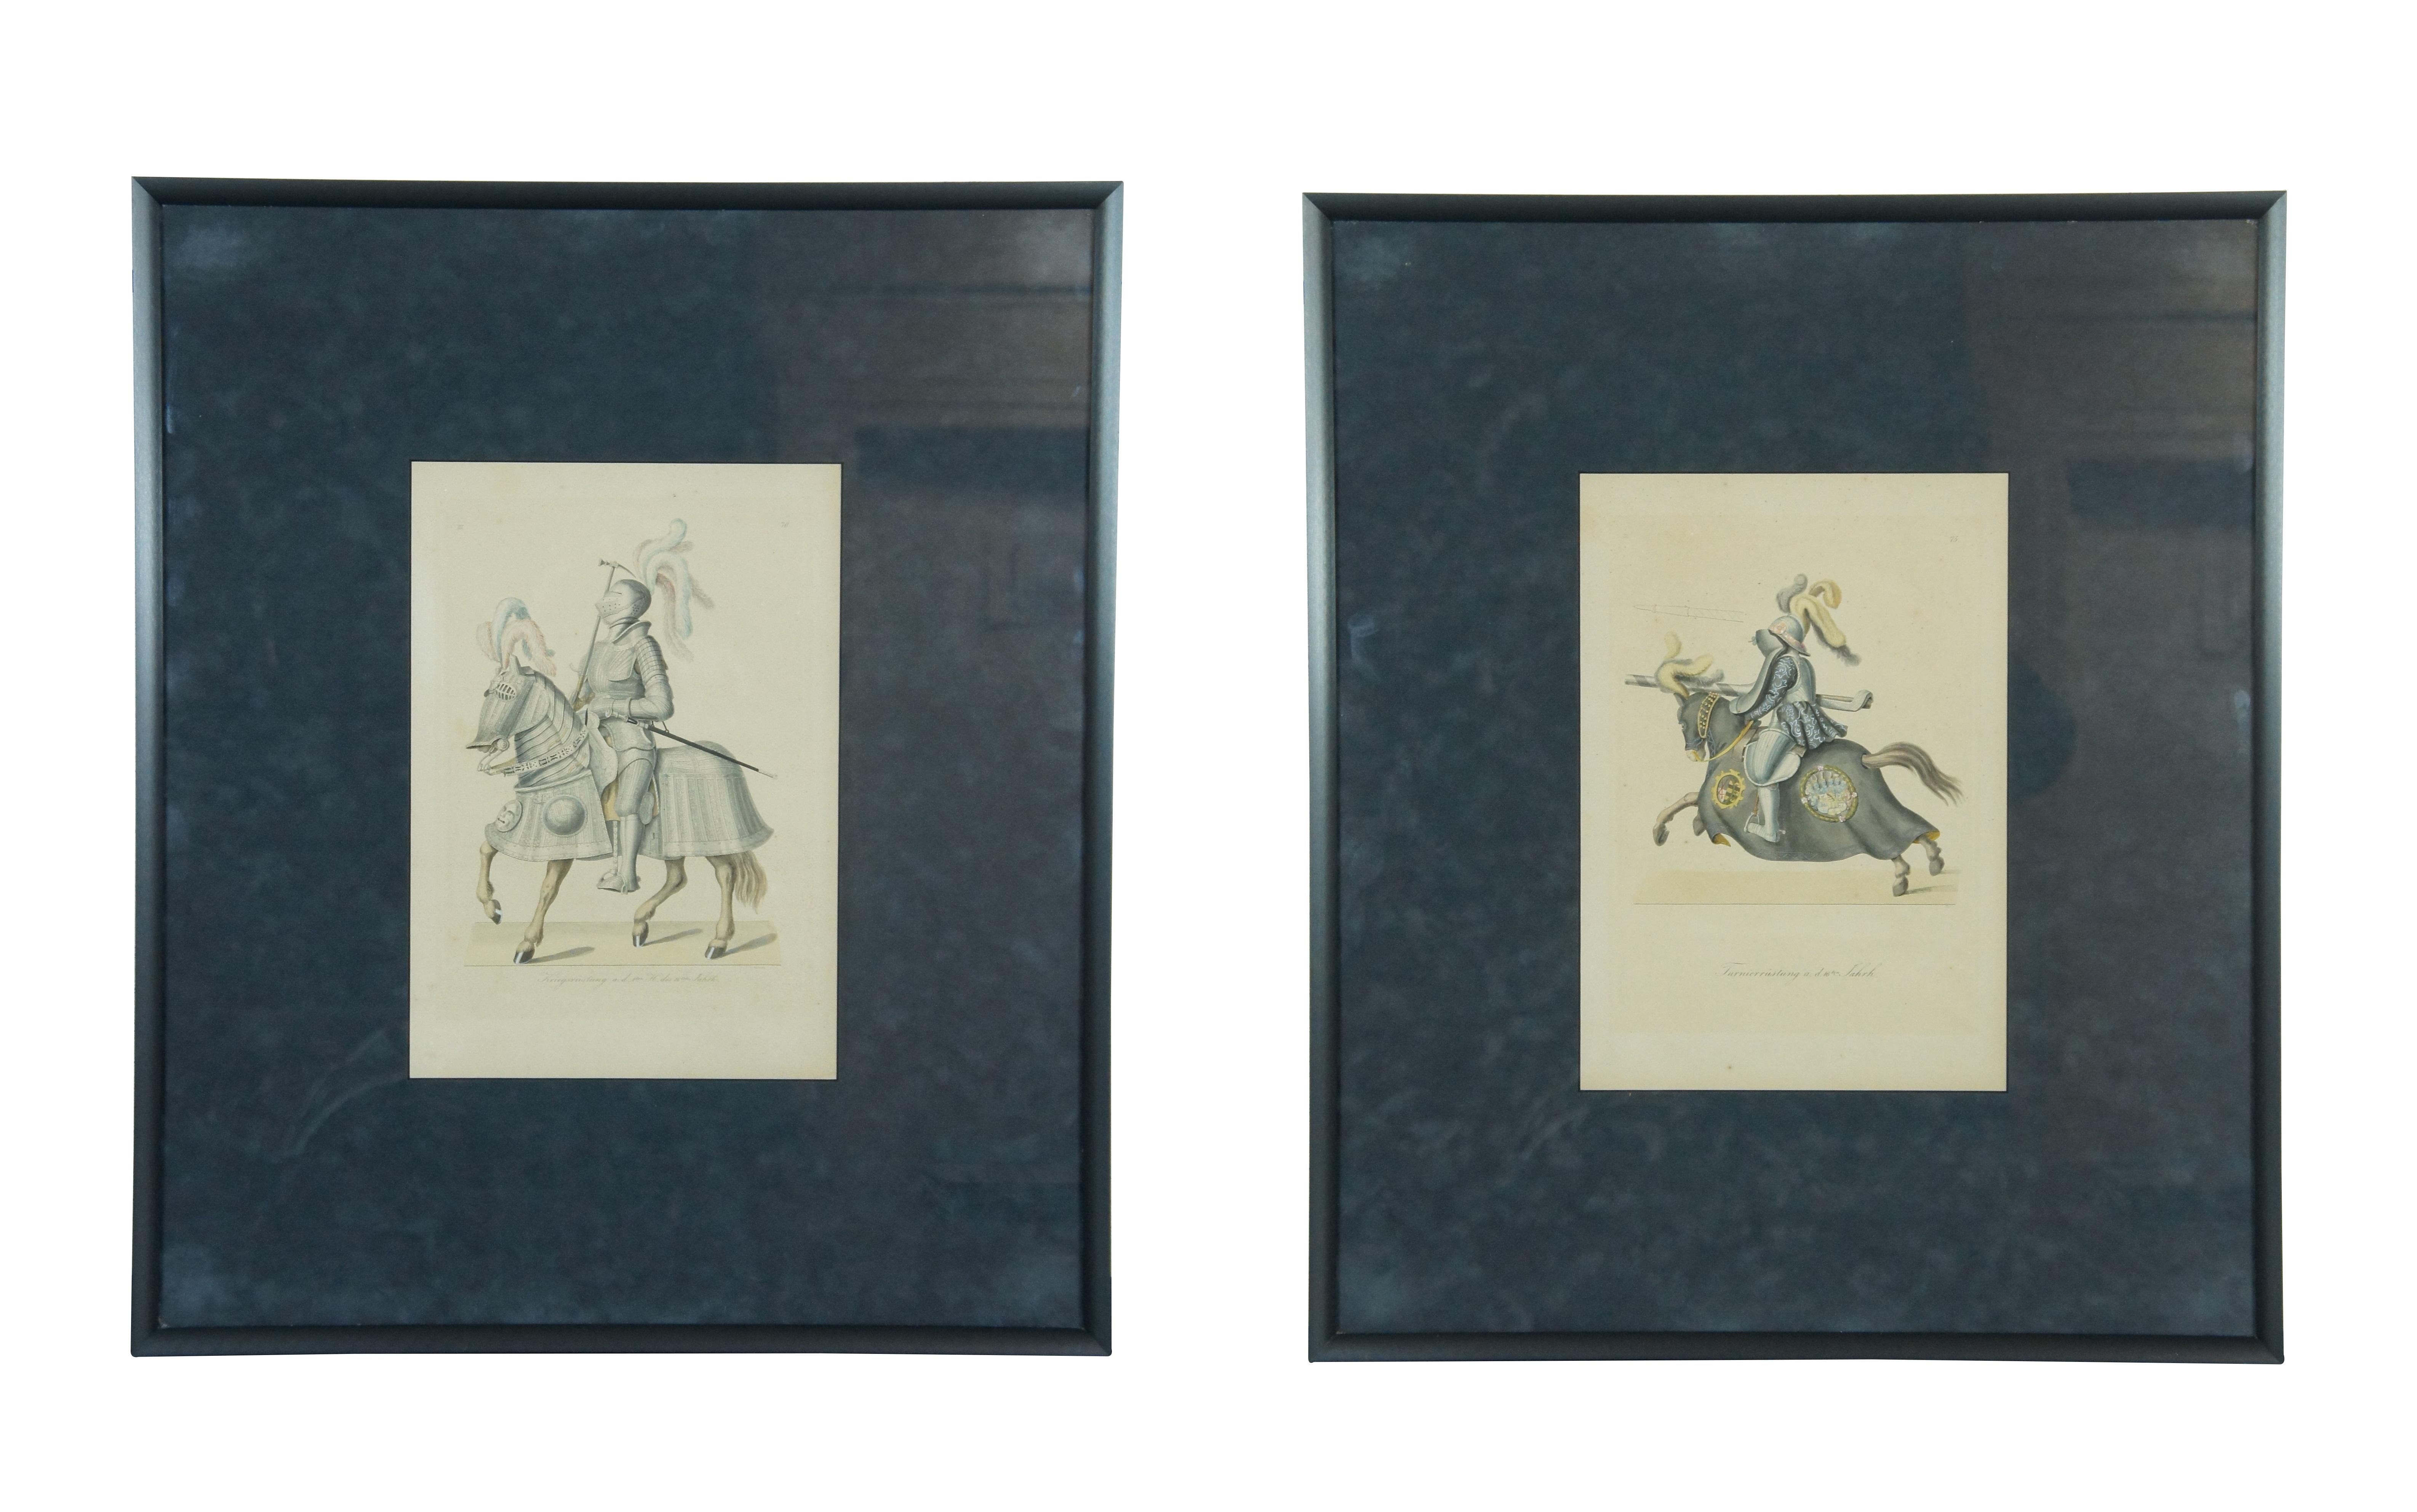 Set of three 19th century medieval chromolithograph prints from Hefner-Alteneck's 